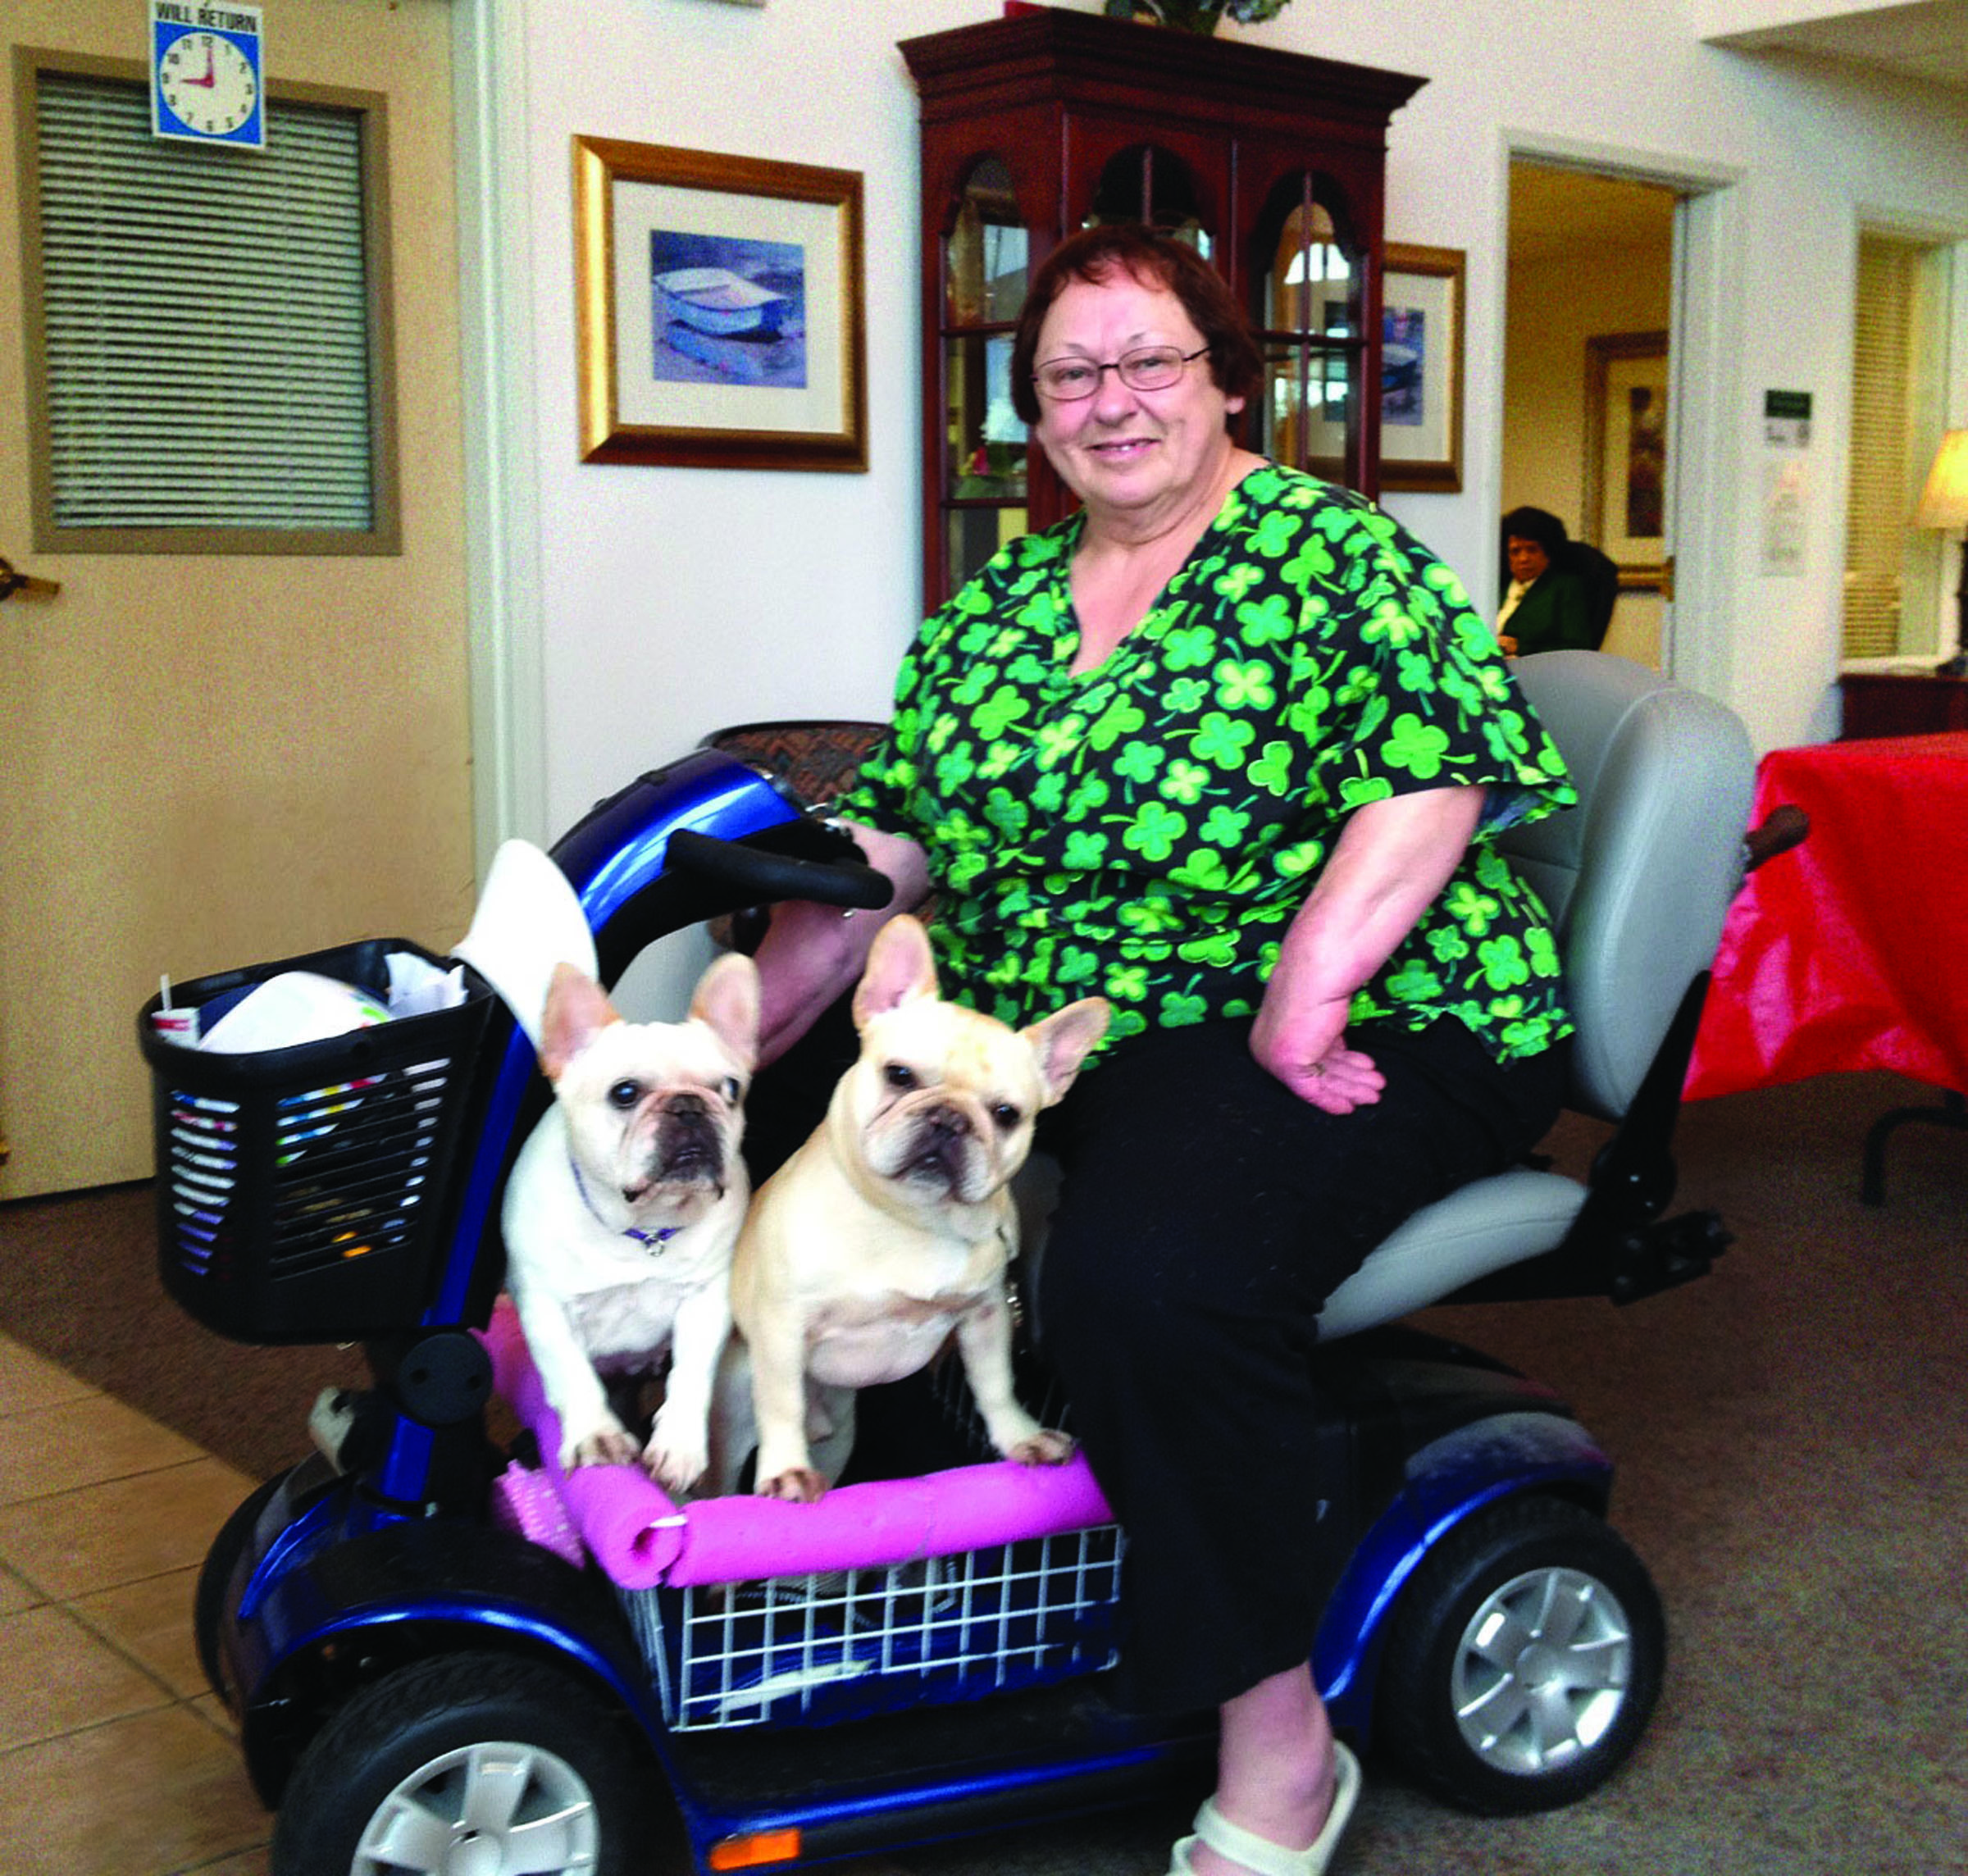 Linda Parks with her scooter and rescued French bulldogs Peanut and Pippa. Karen Griffiths/For Peninsula Daily News